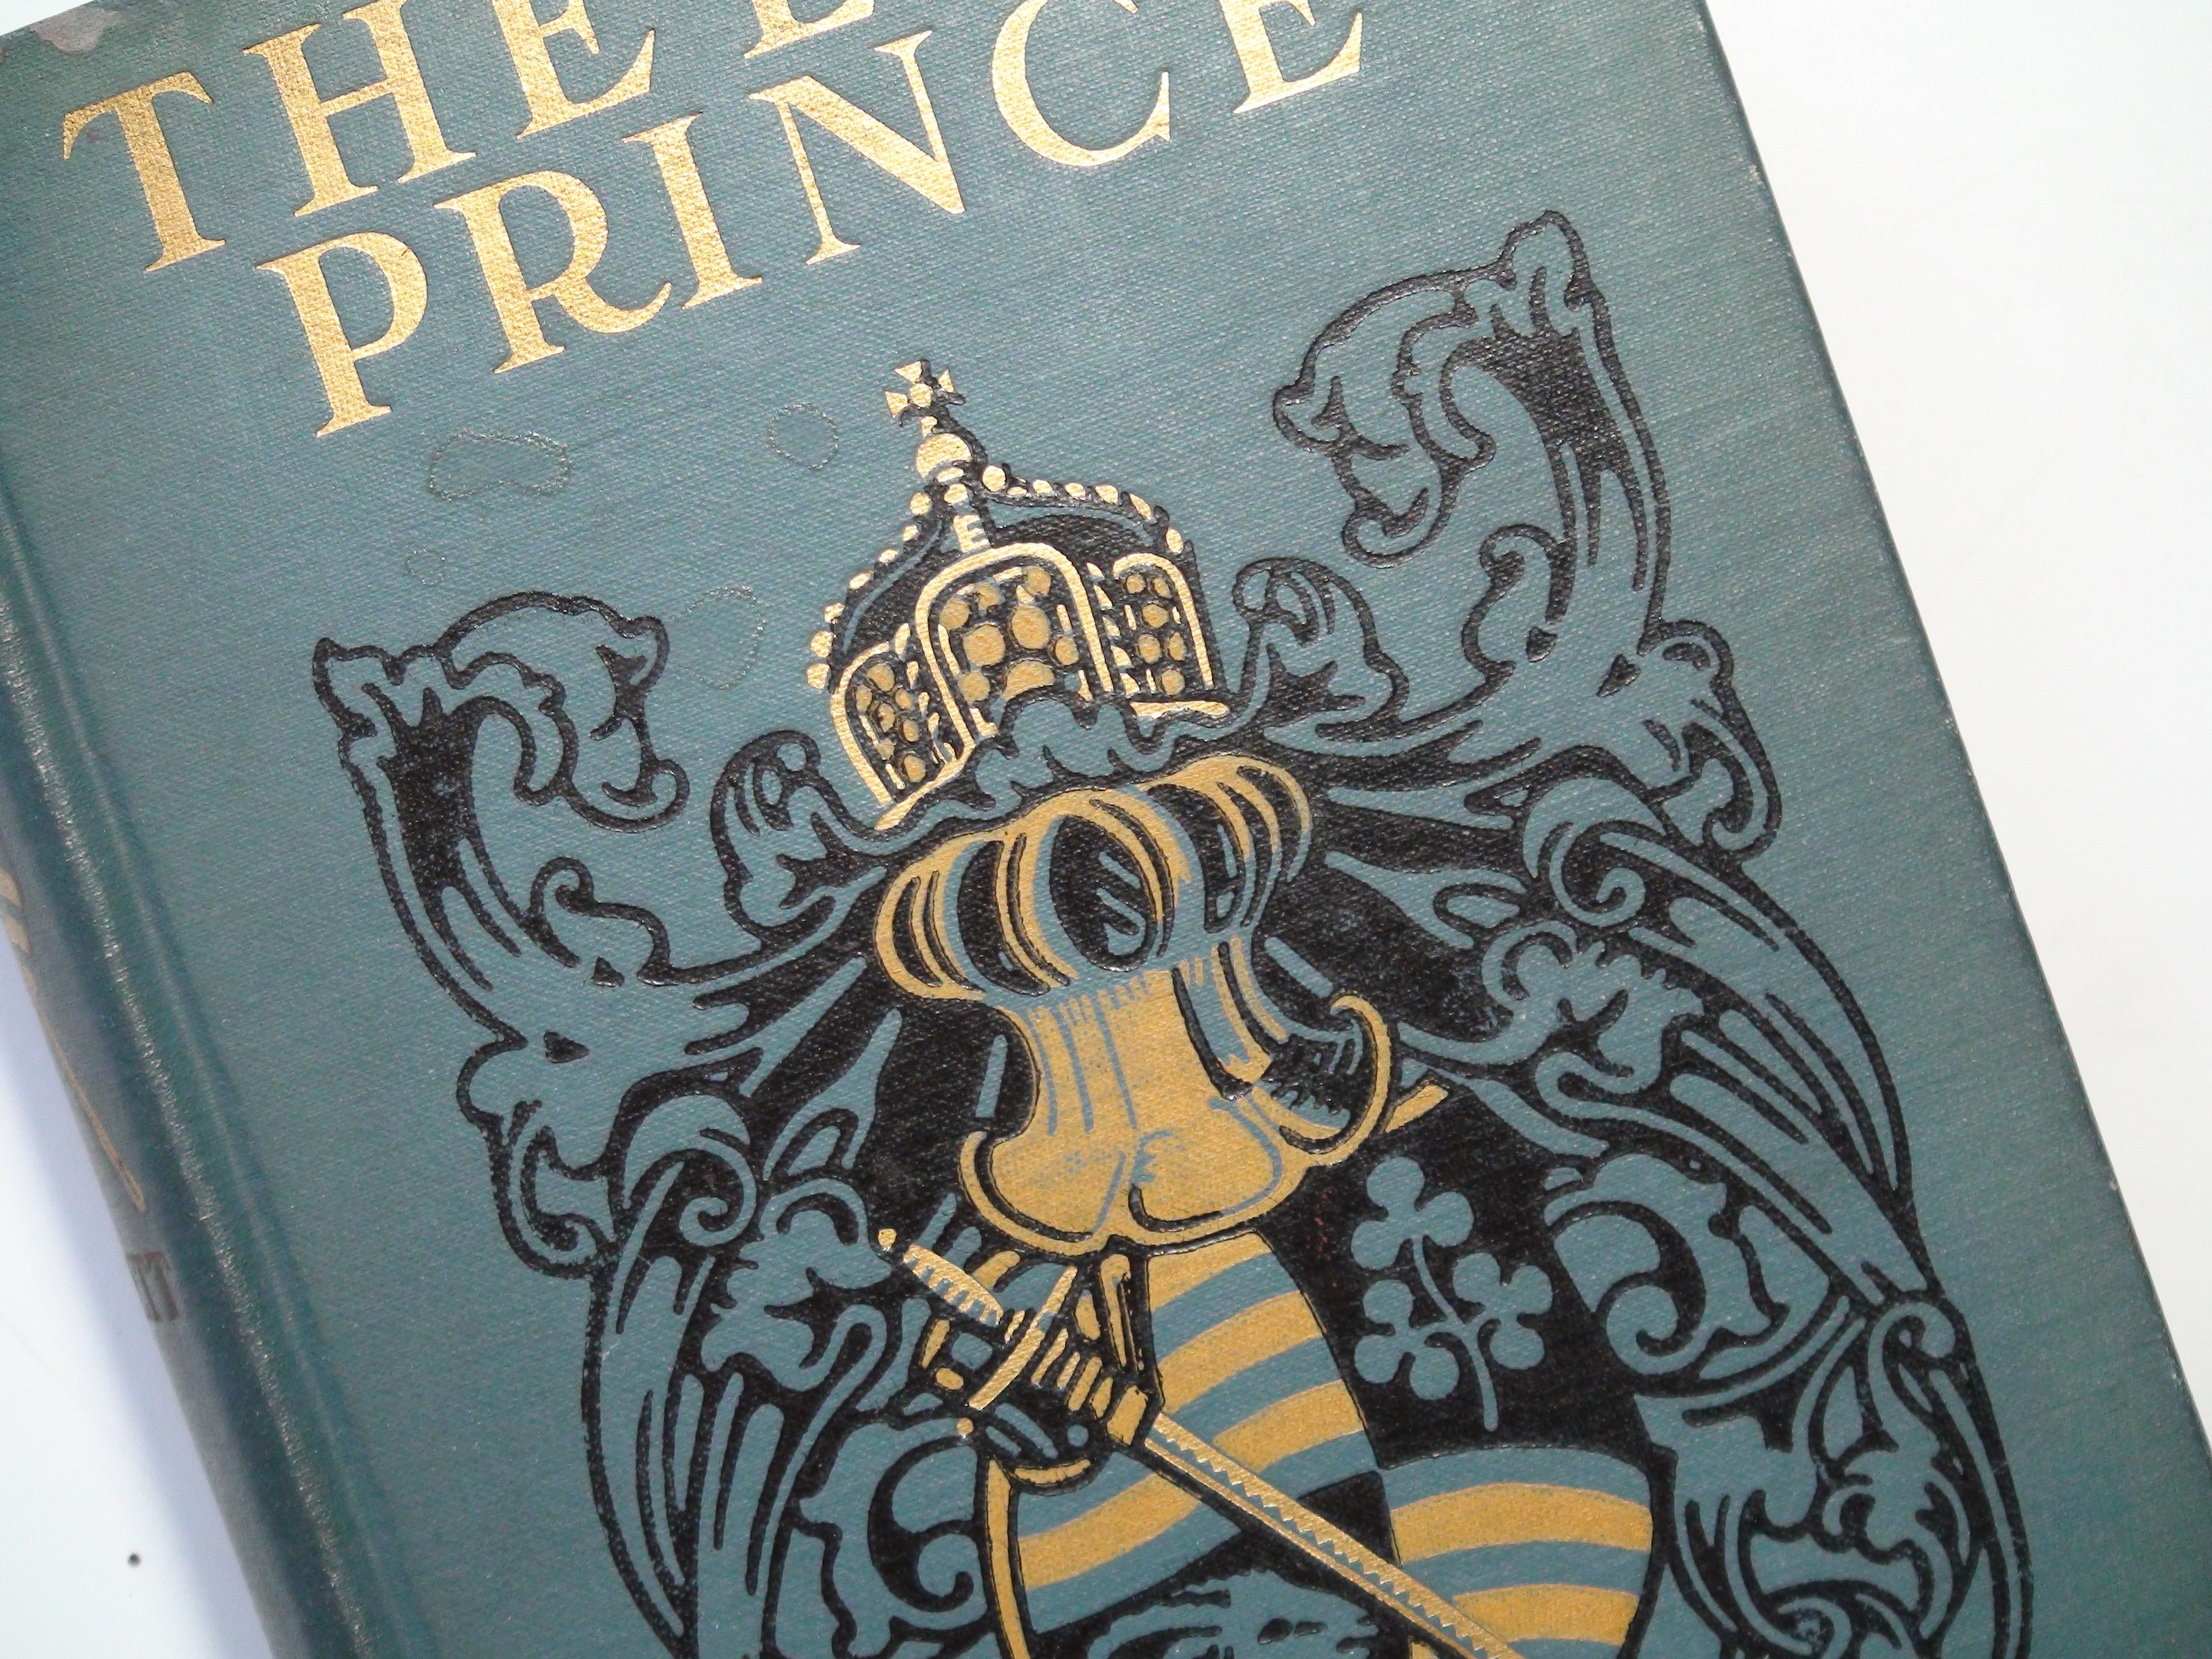 The Lost Prince, by Frances Hodgson Burnett, Illustrated Maurice L. Bower, 1915